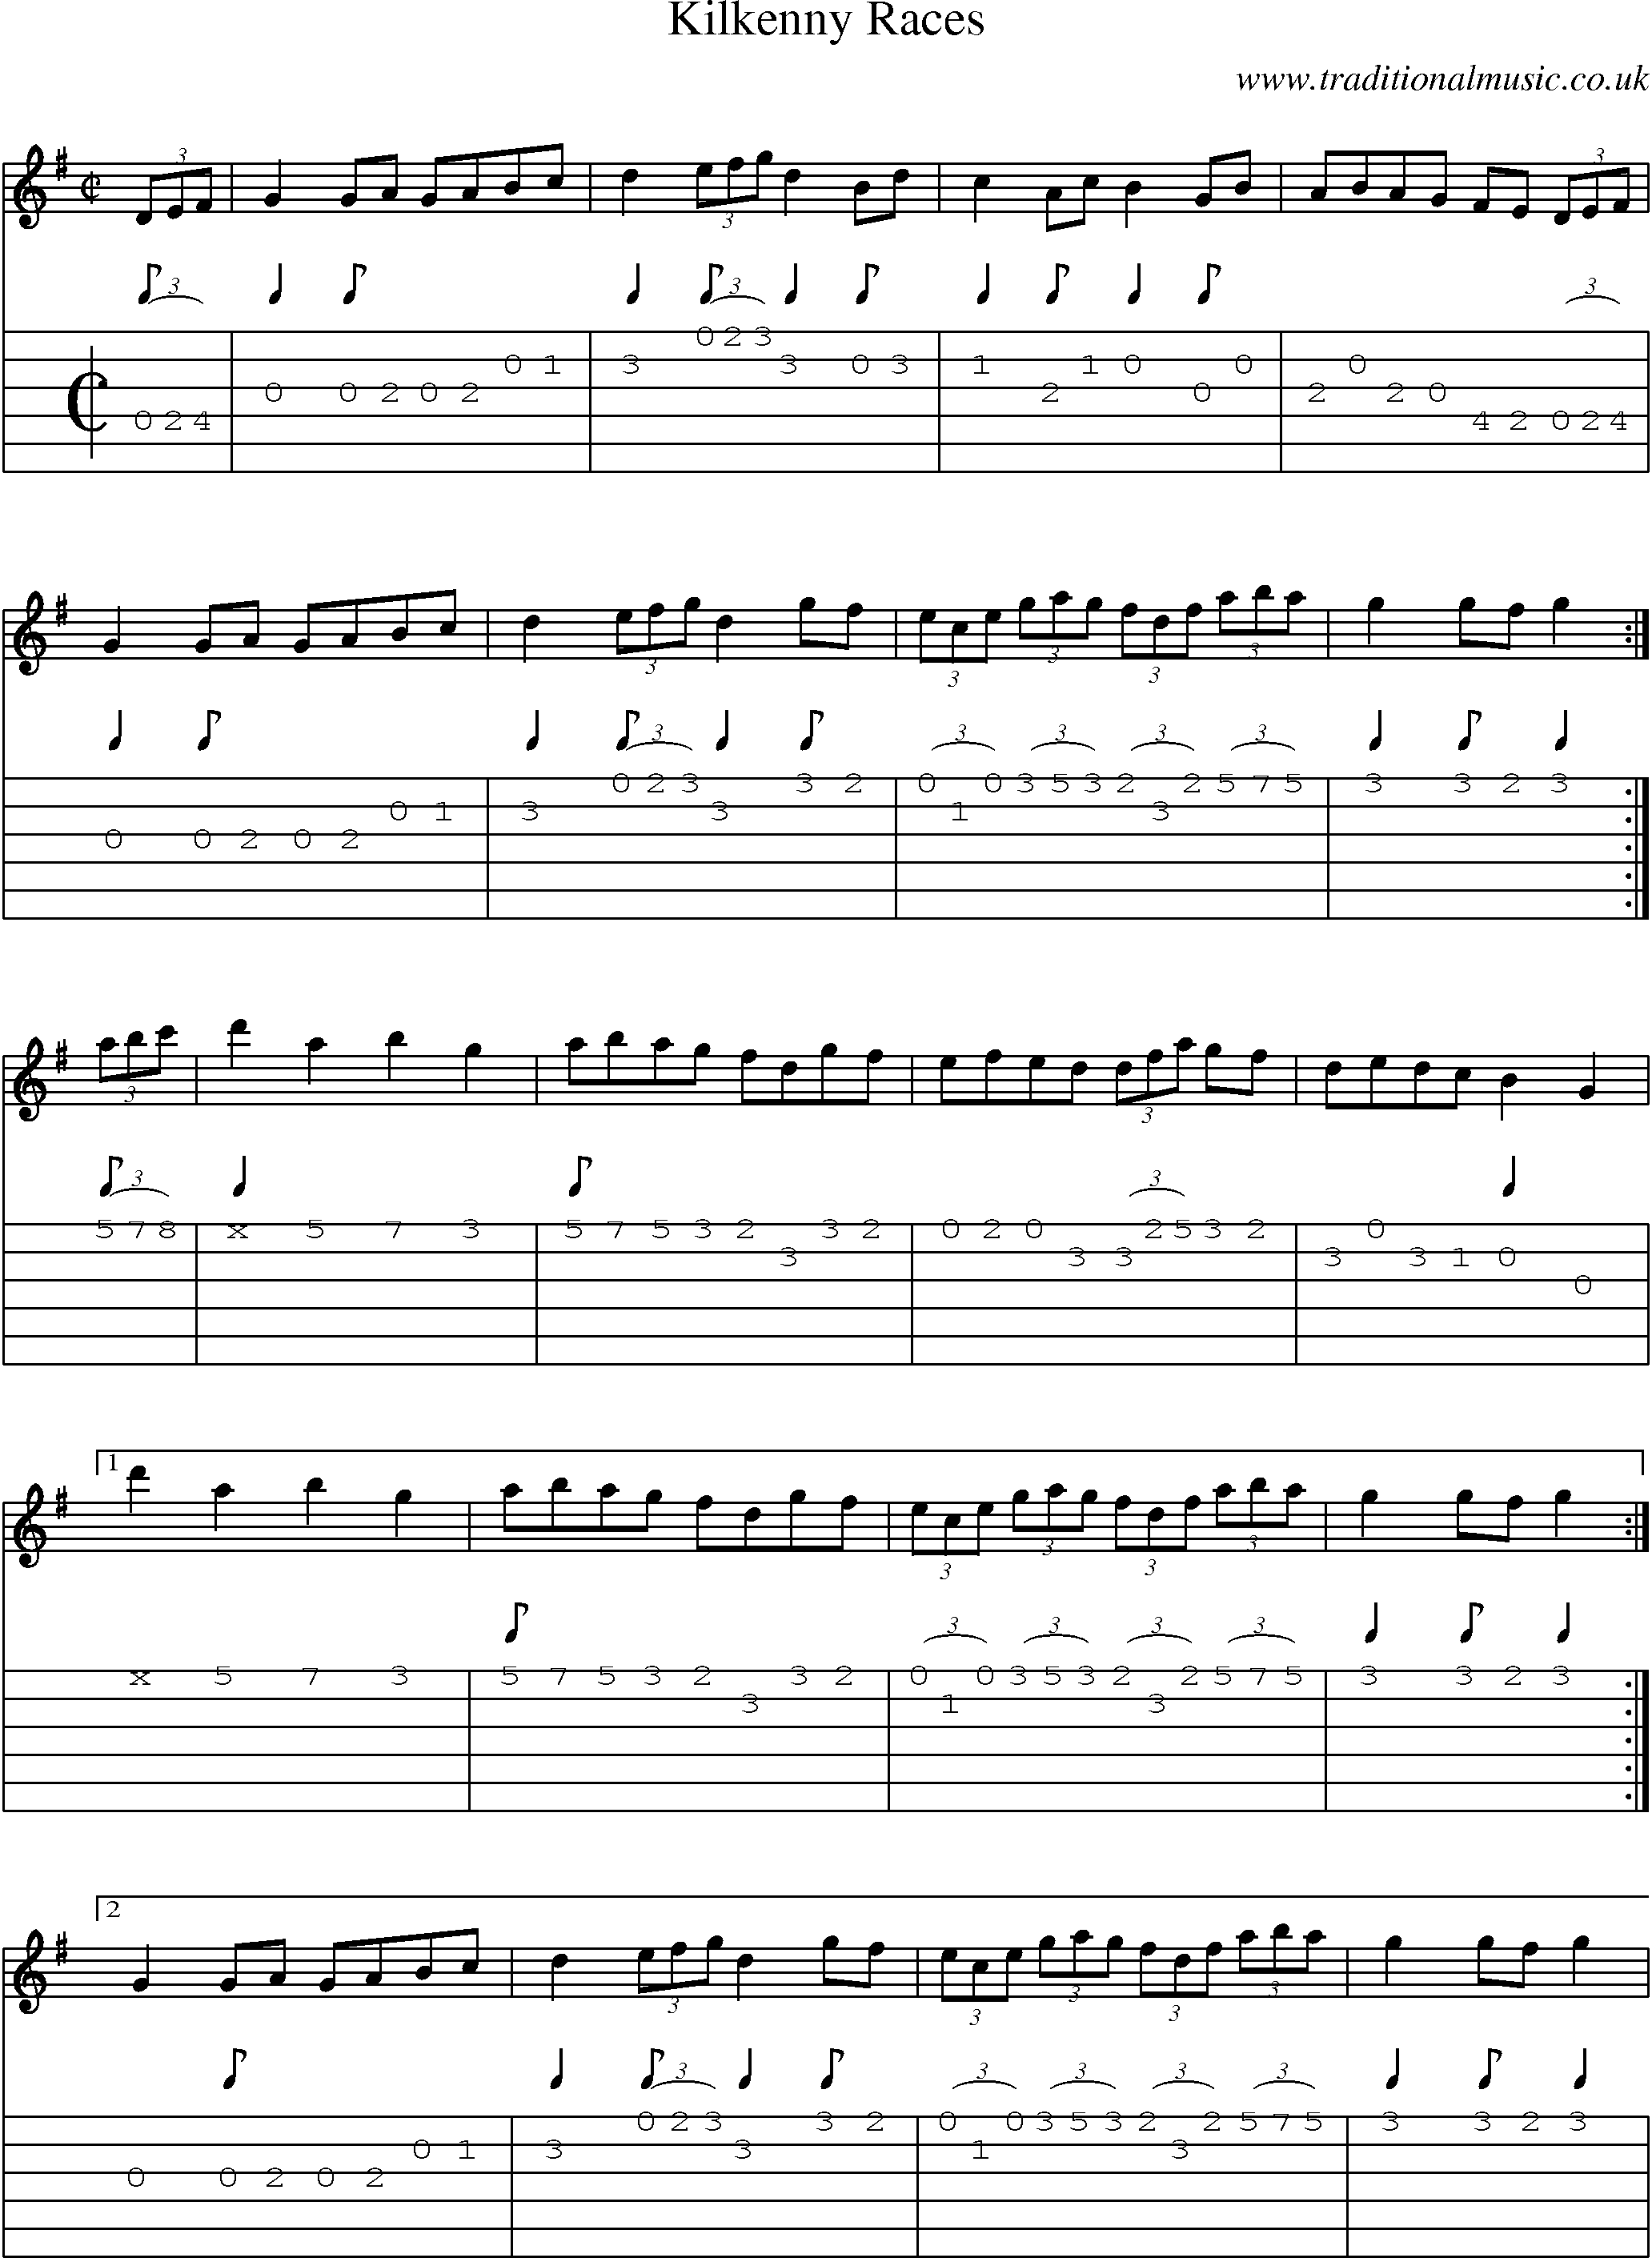 Music Score and Guitar Tabs for Kilkenny Races